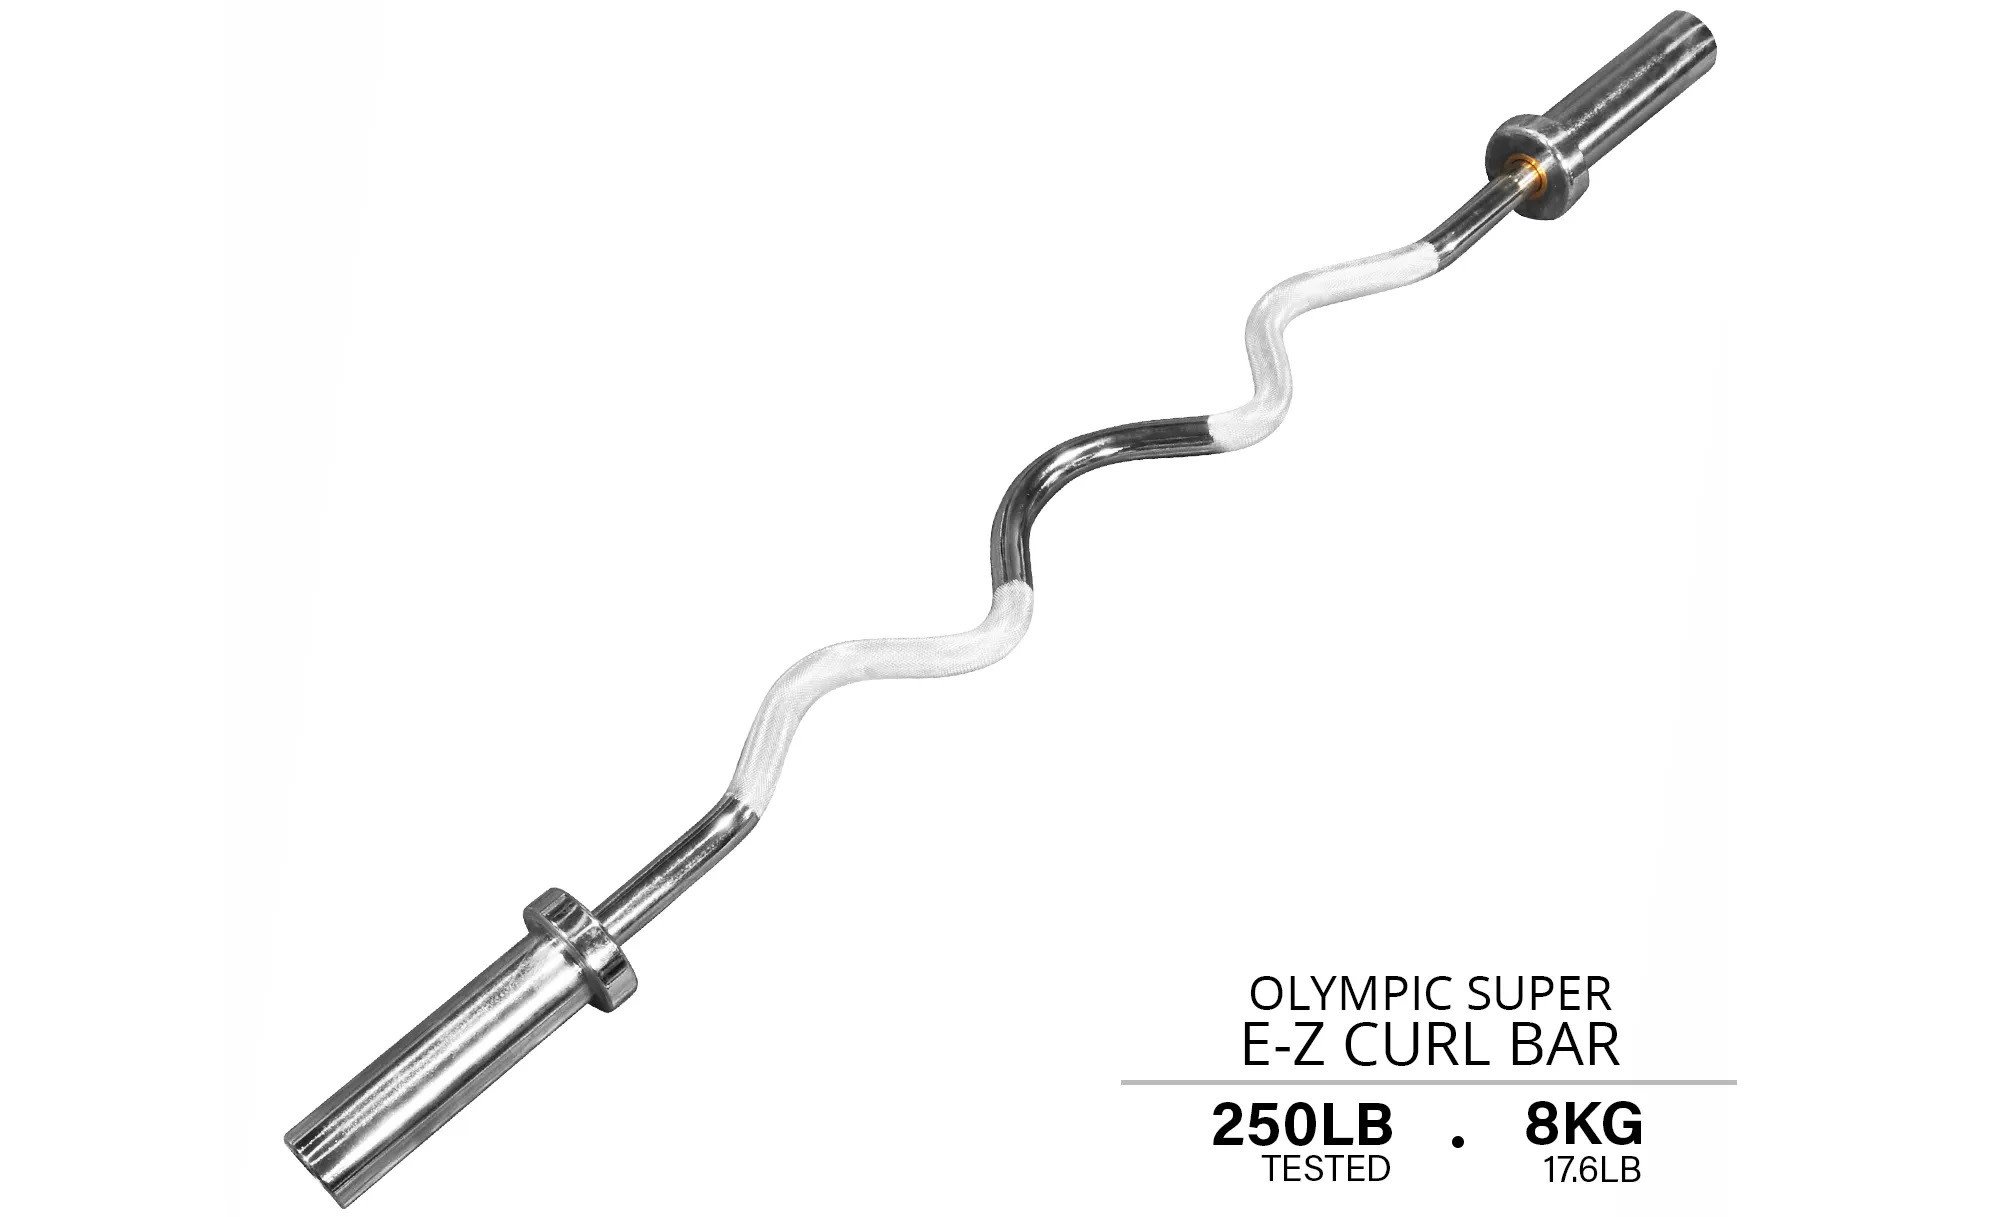 Northern Lights Olympic Super E-Z Curl Bar